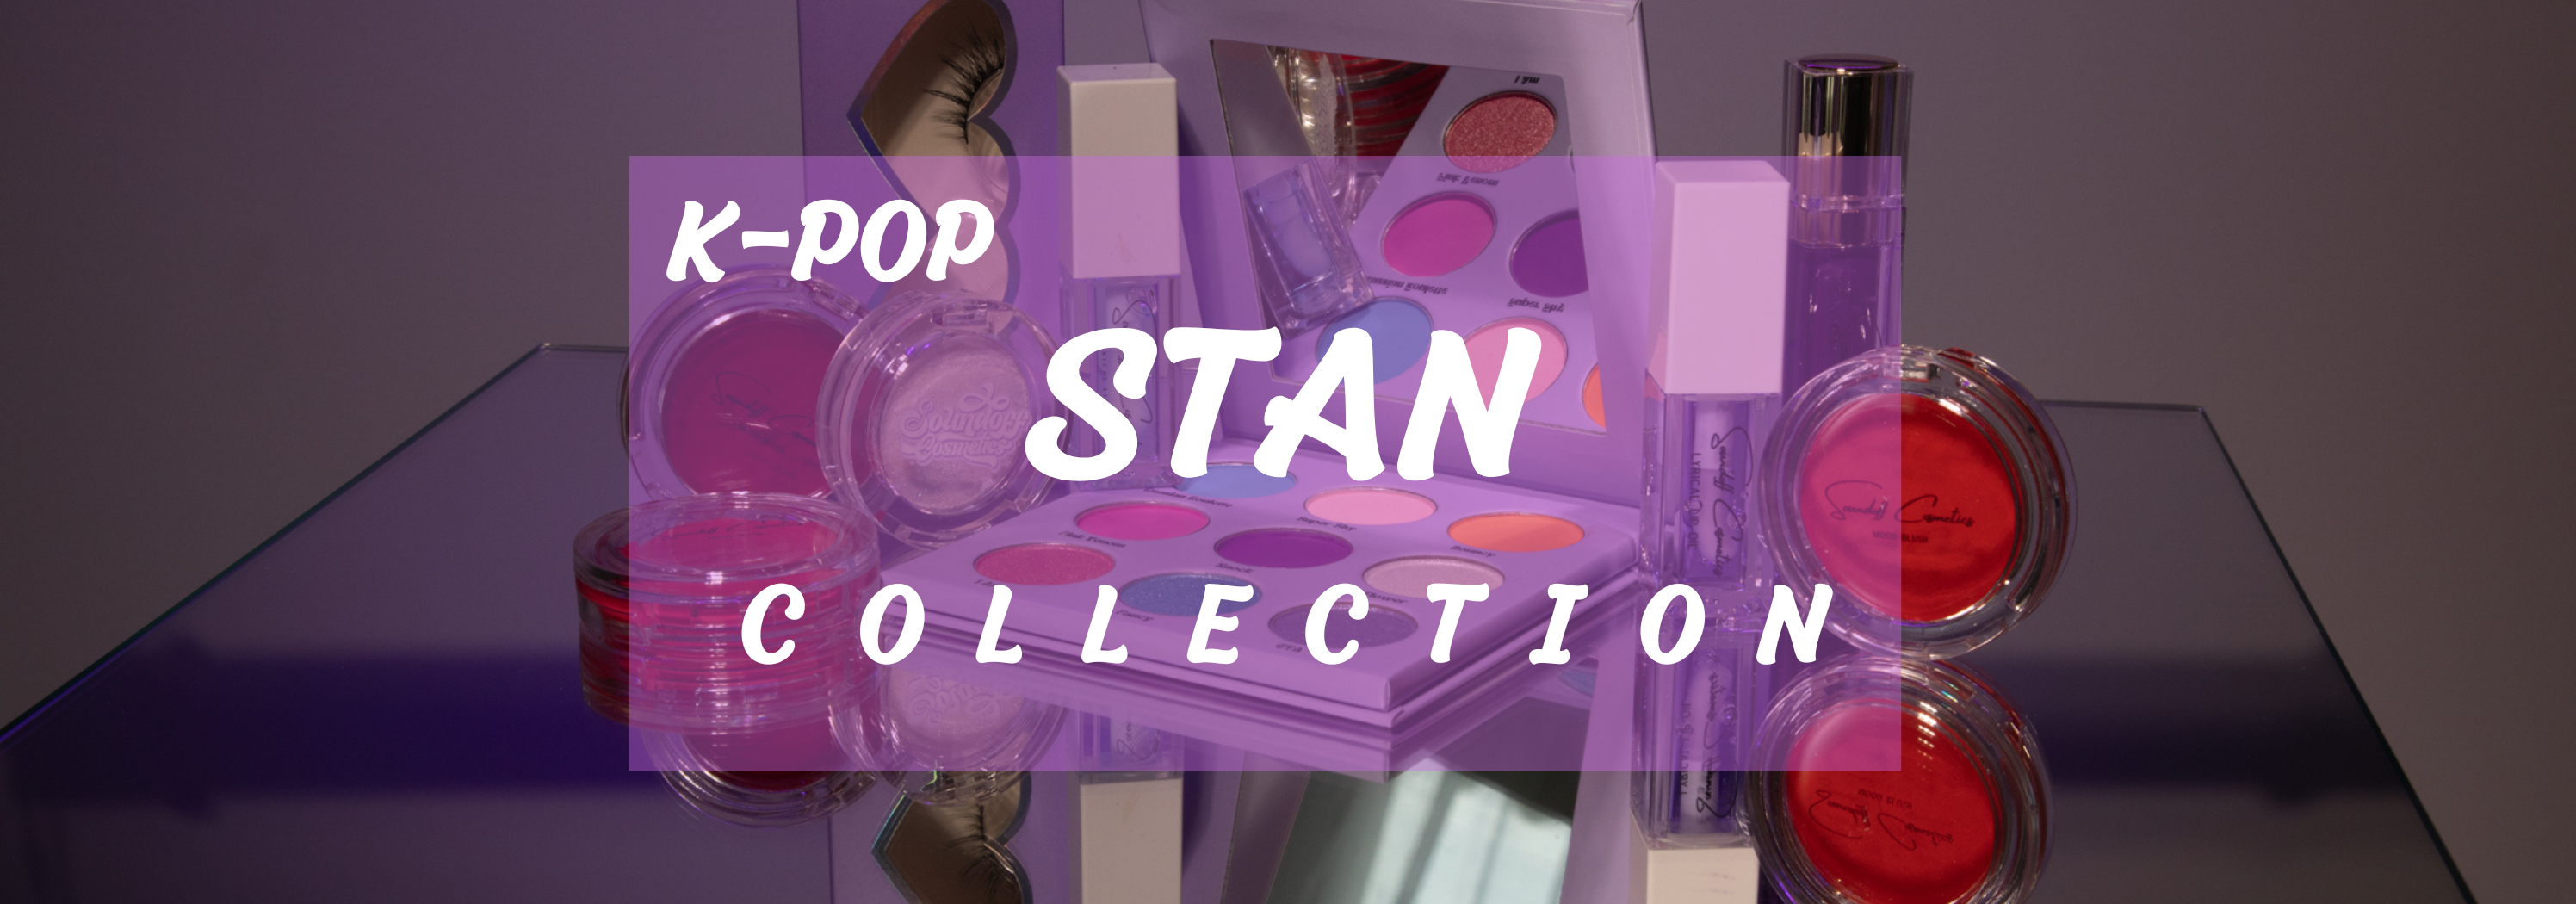 STAN COLLECTION